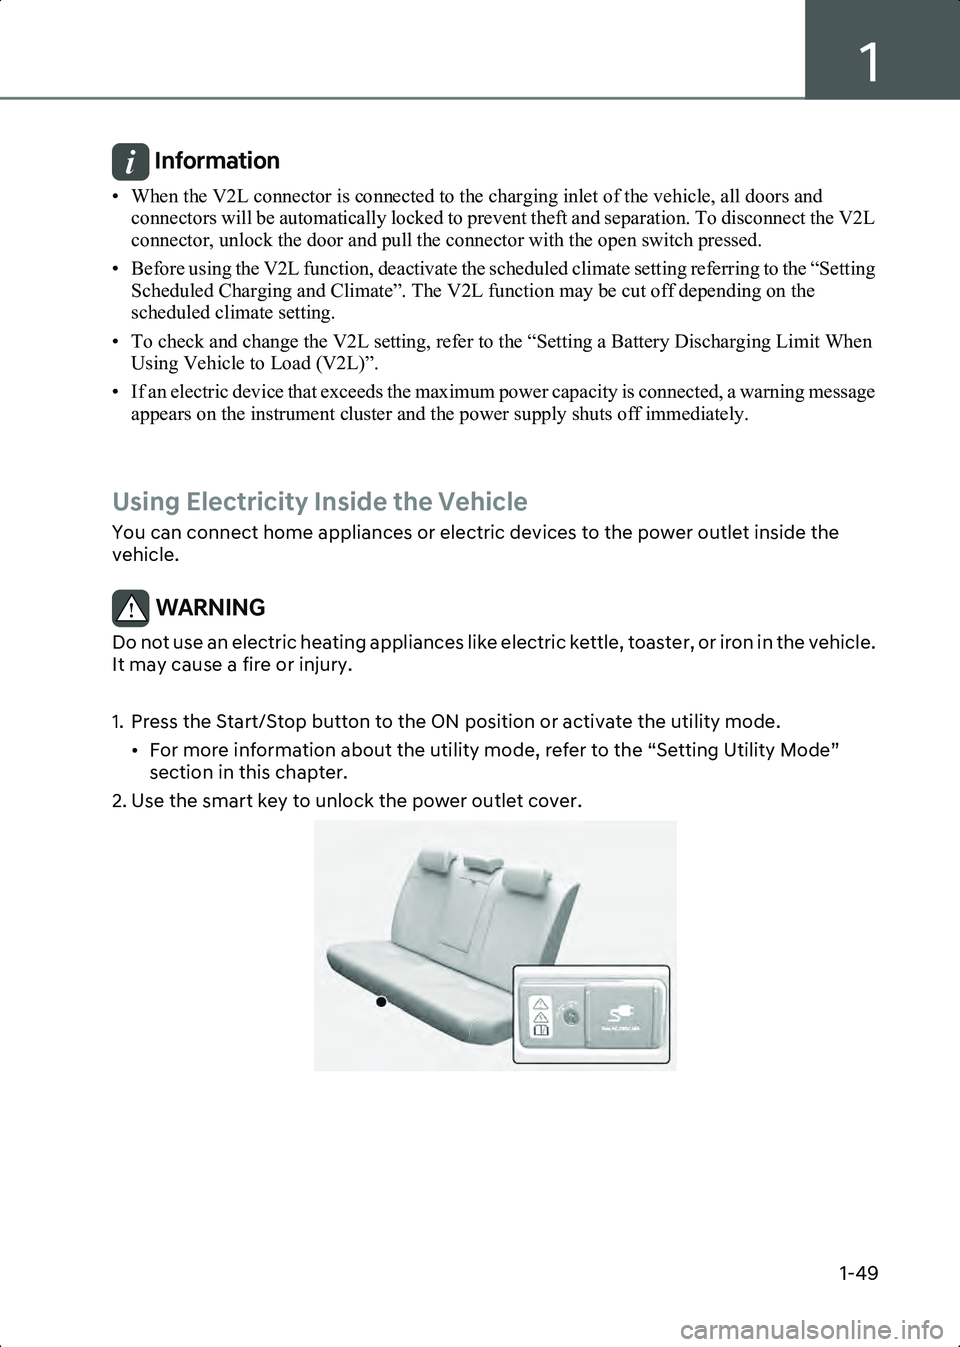 HYUNDAI IONIQ 6 2023  Owners Manual 1
1-49
Information • When the V2L connector is connected to the charging inlet of the vehicle, all doors and connectors will be automatically locked to prevent theft and separation. To disconnect th